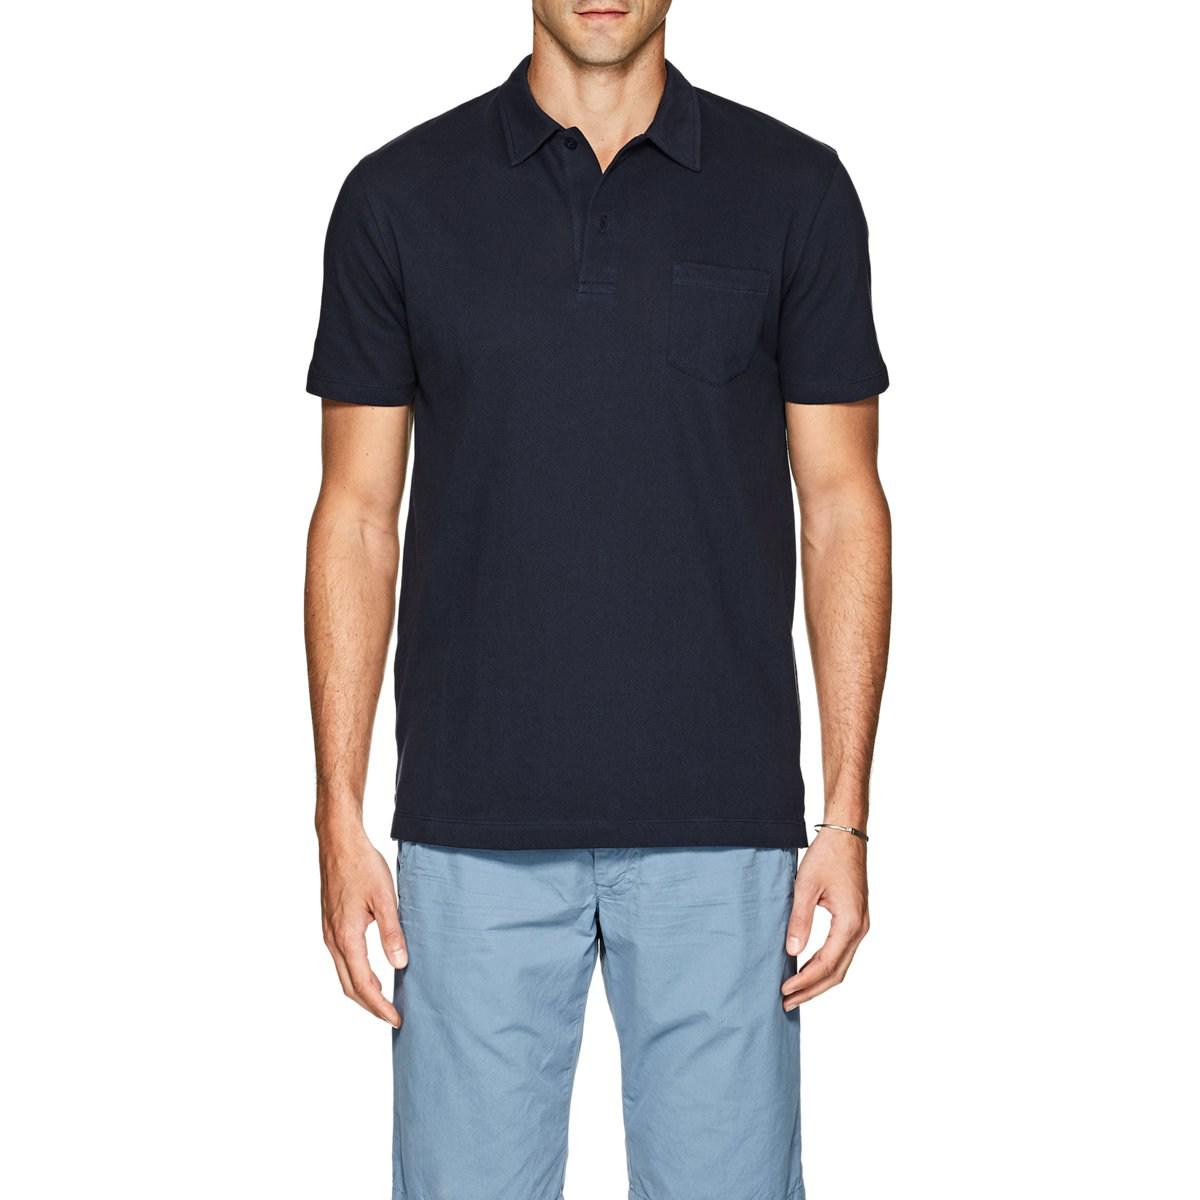 Sunspel Riviera Cotton Polo Shirt in Navy (Blue) for Men - Lyst